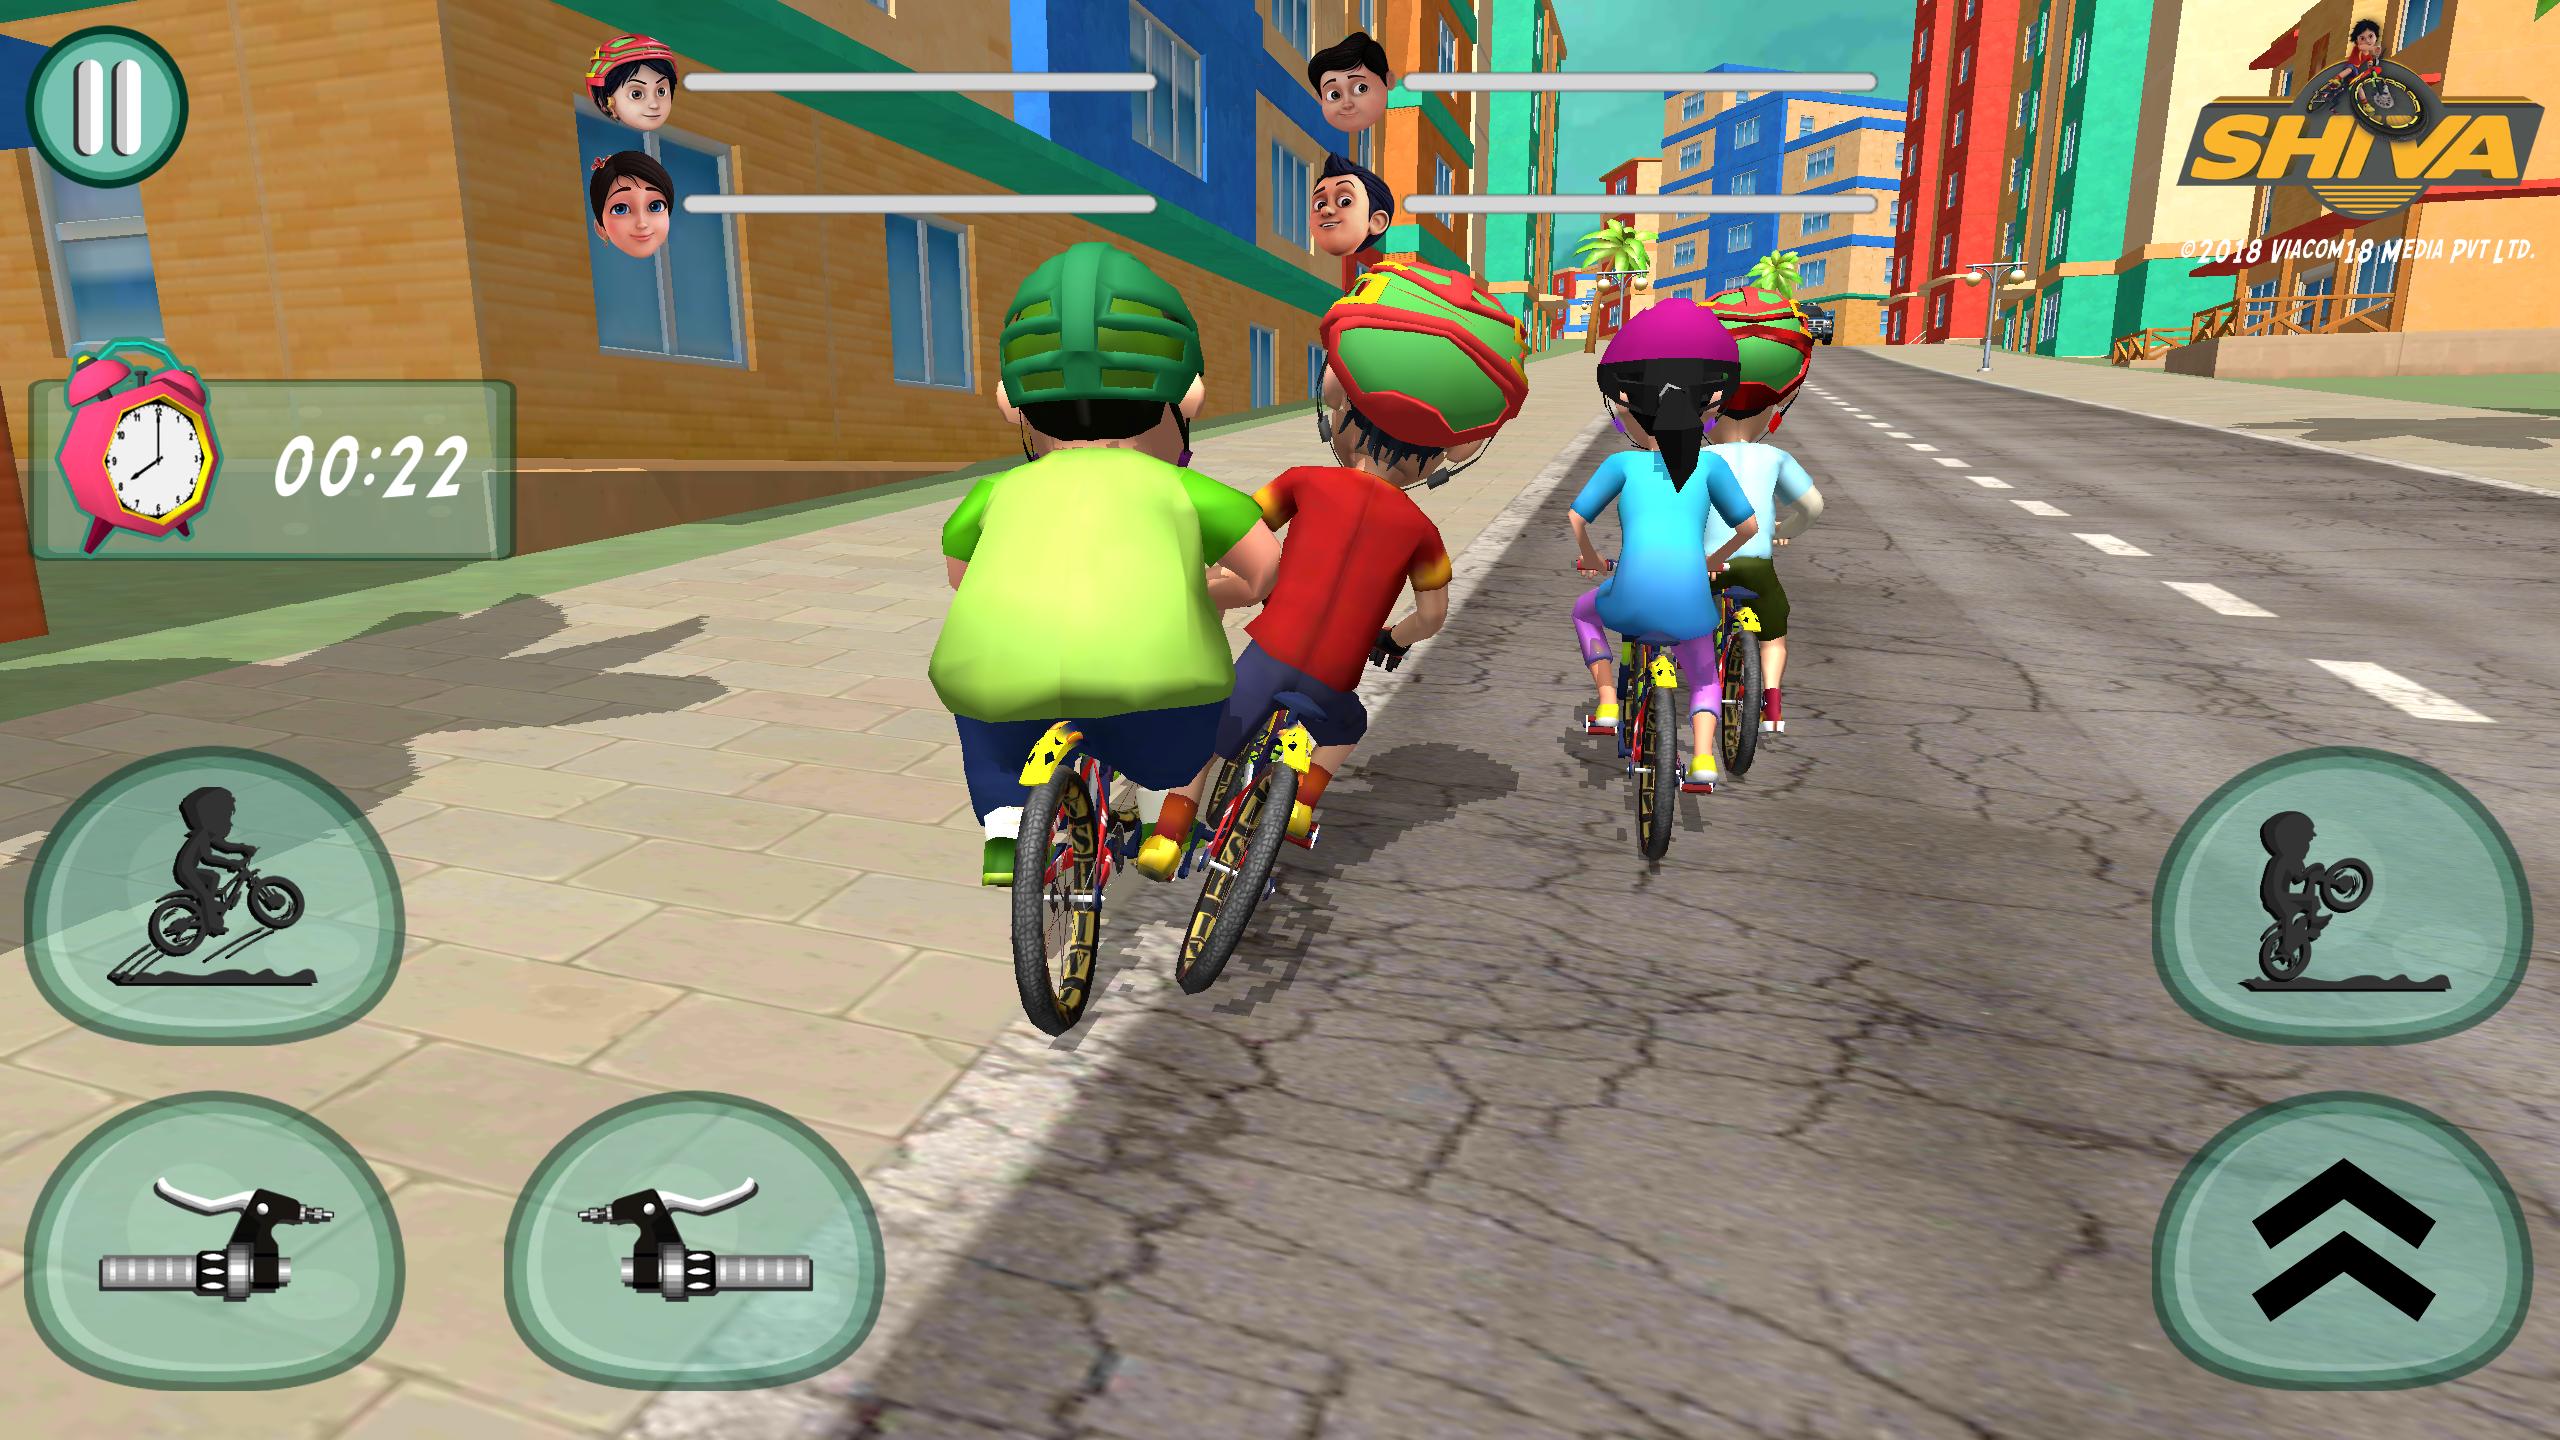 Shiva Bicycle Racing For Android Apk Download